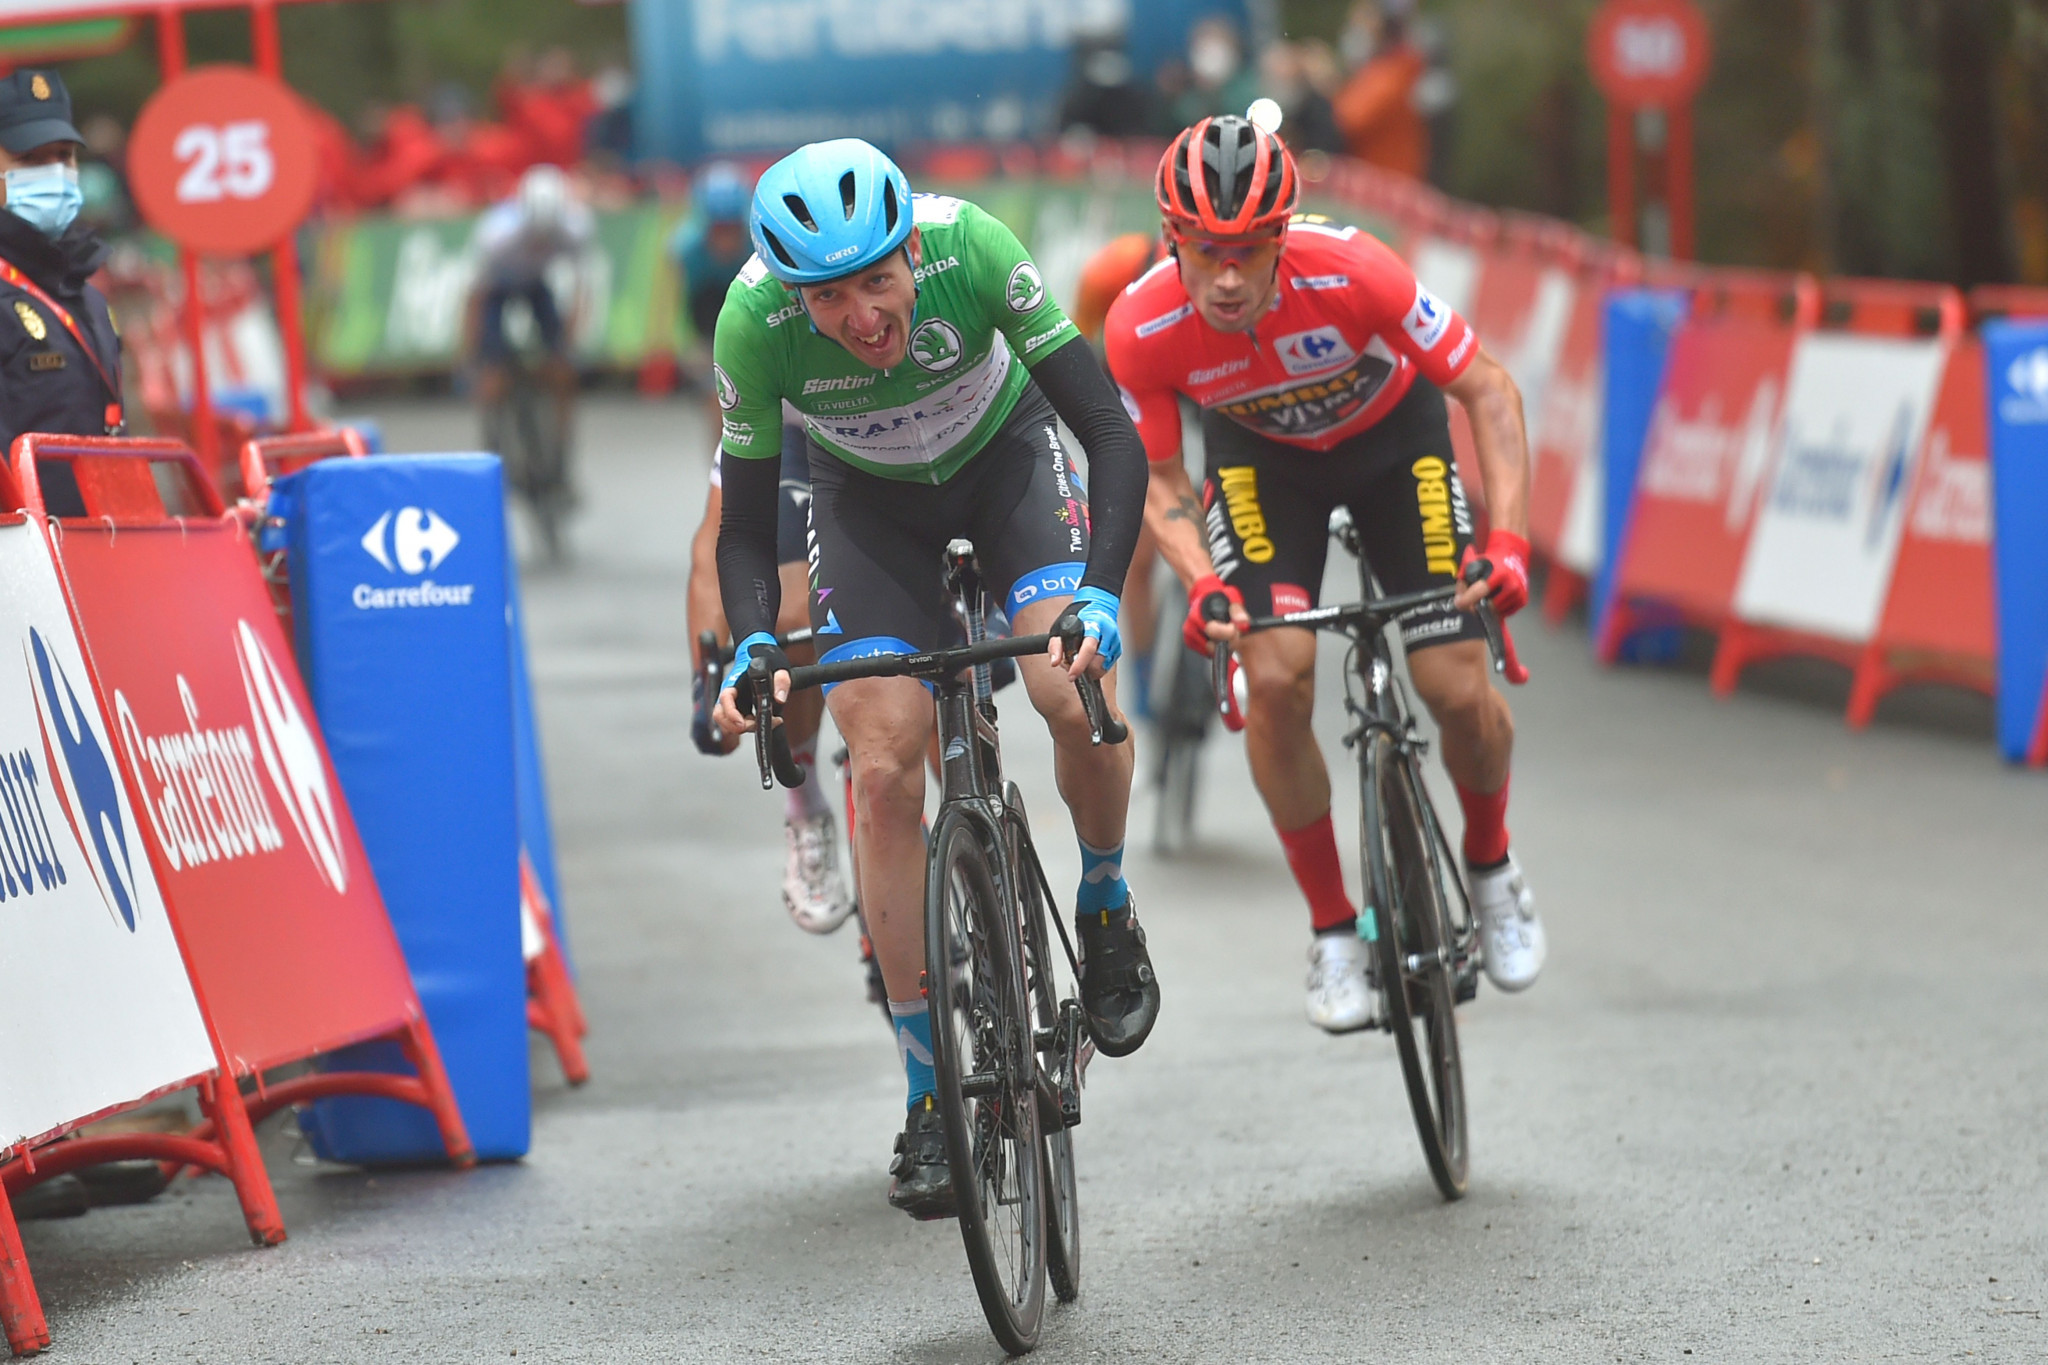 Martin snatches stage victory at Vuelta a España as route adjusted to avoid France